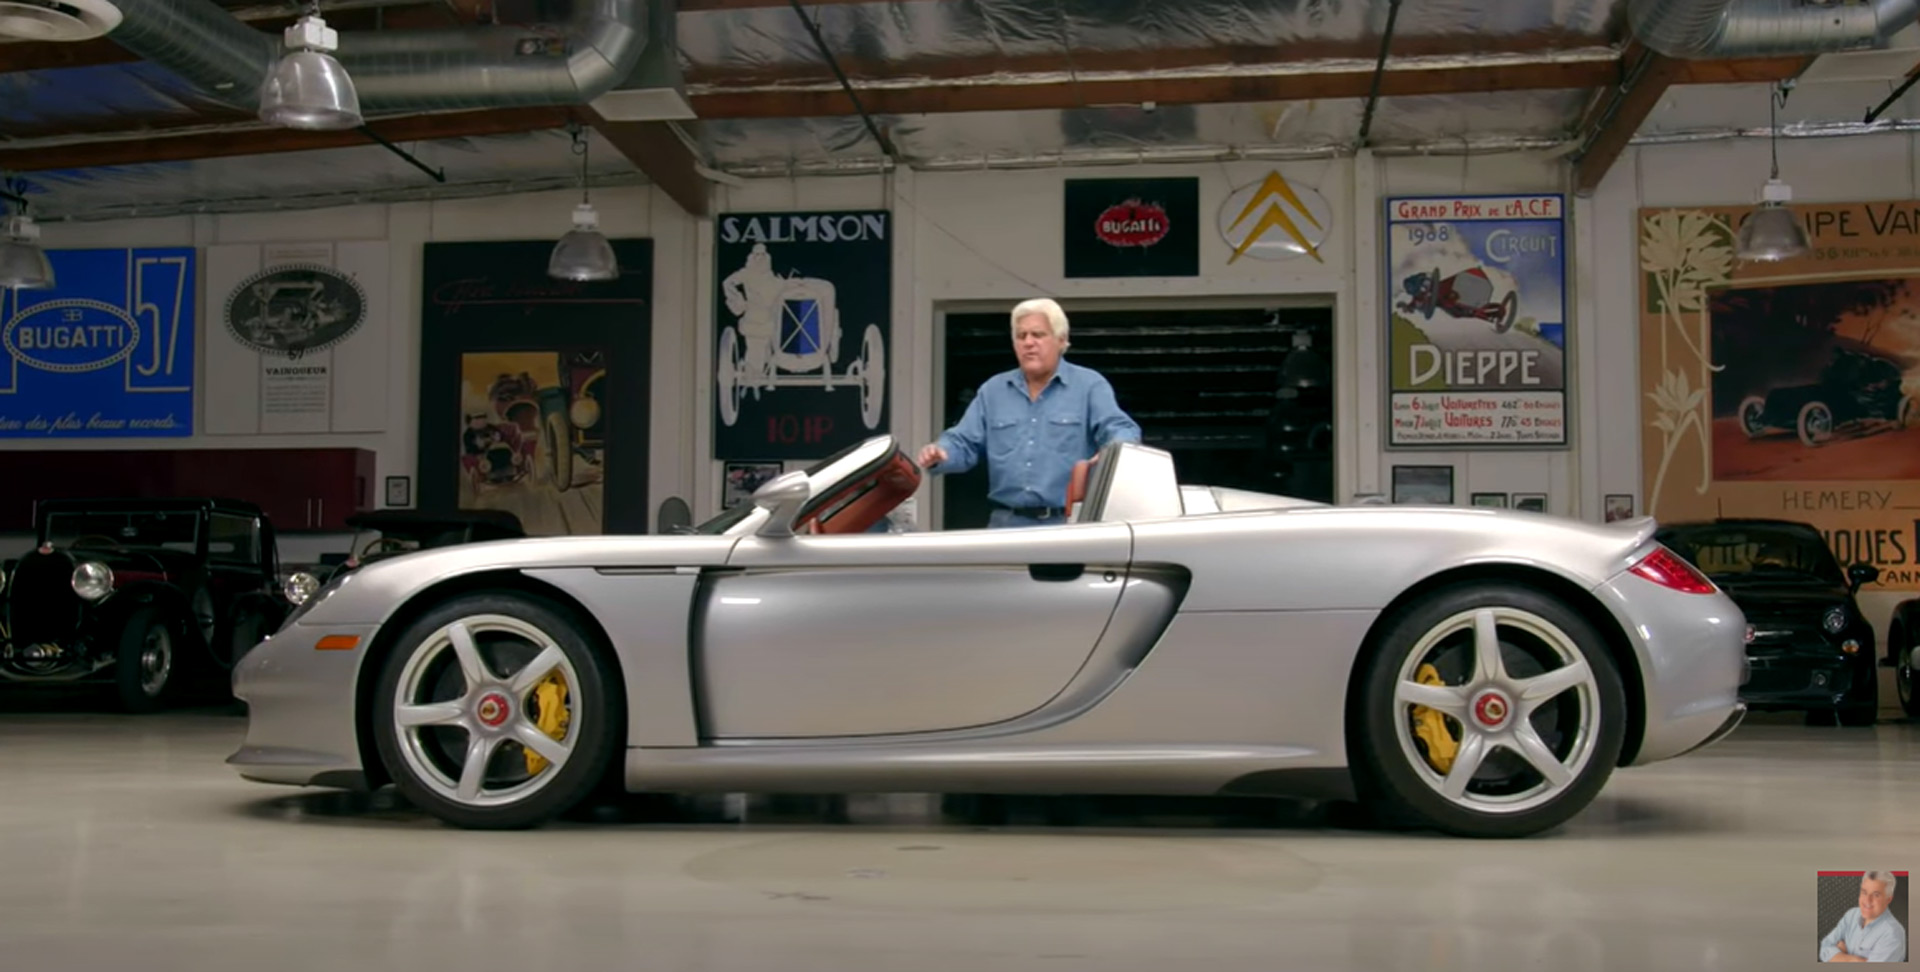 Jay Leno's Porsche Carrera GT wasn't the most reliable car